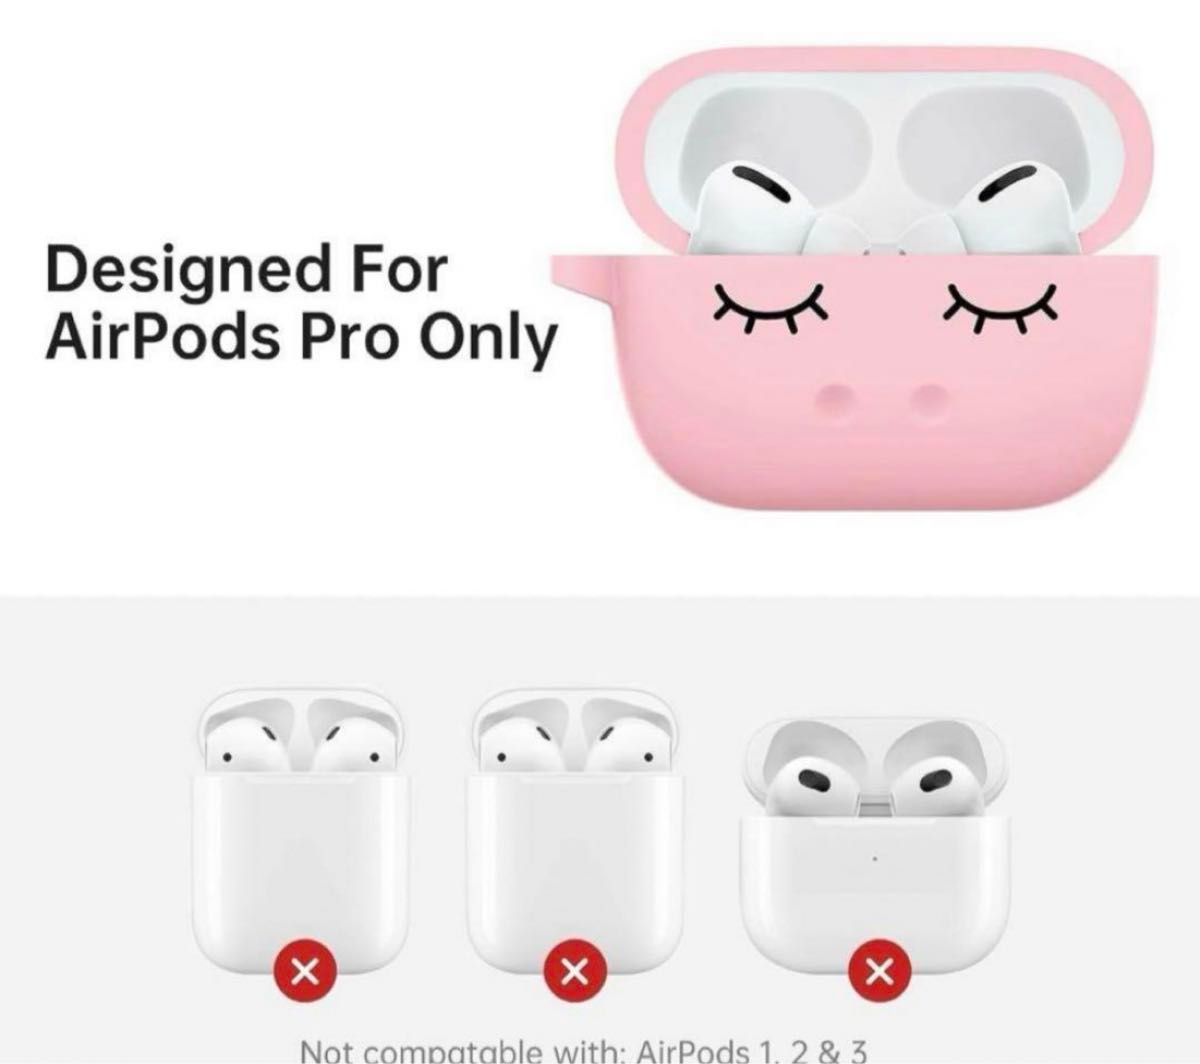 AirPods Proケース　ユニコーン　落下防止 シリコン 充電ケース ピンク AirPods Pro